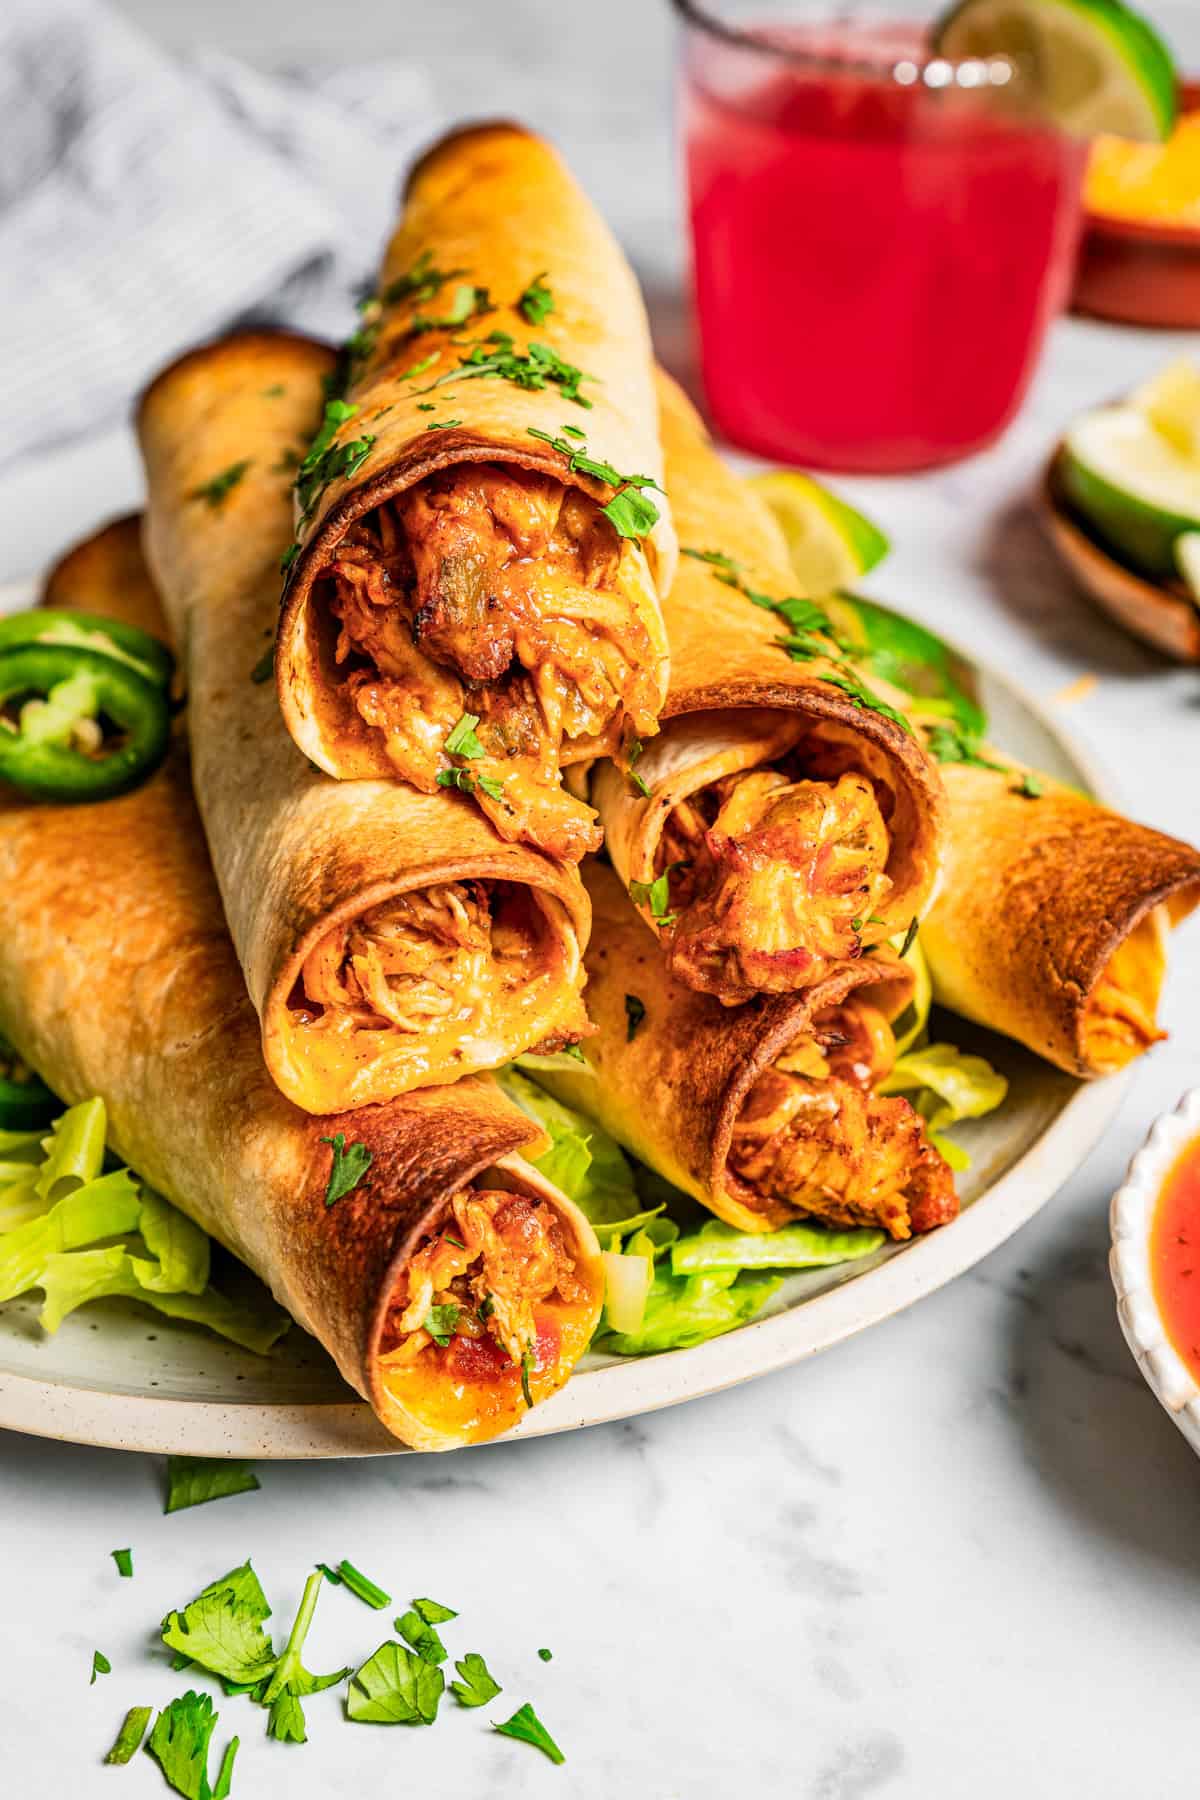 Six chicken flautas stacked over a bed of shredded lettuce on a plate.